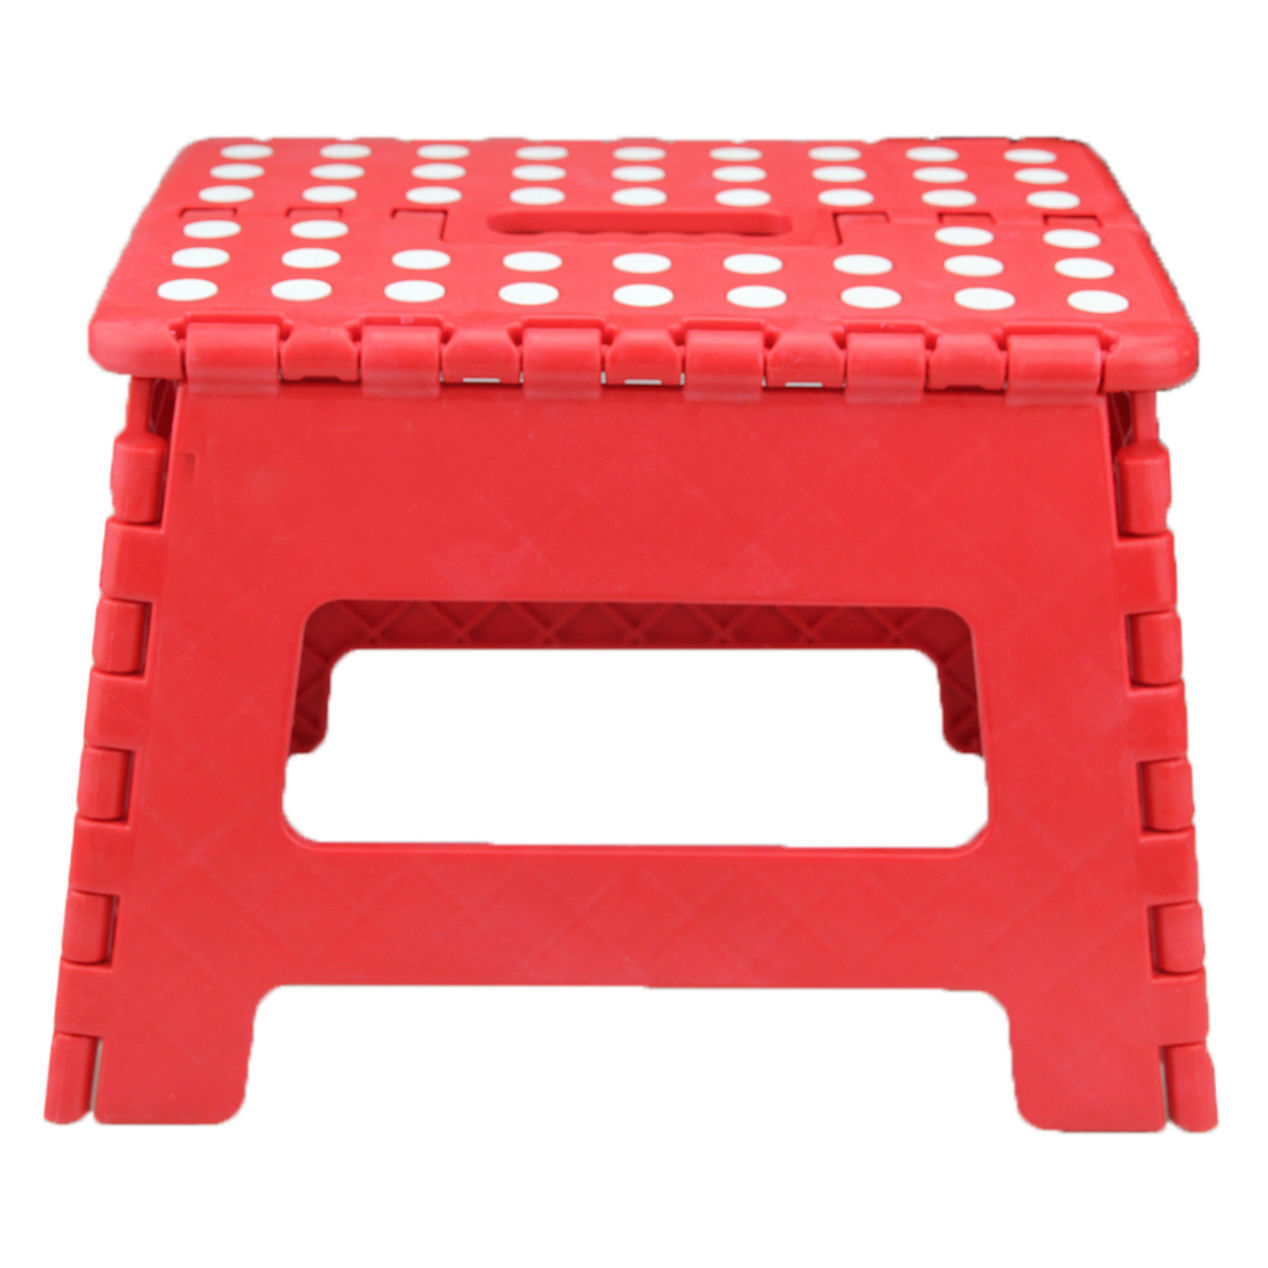 Home Folding Step Stool For Kids Adults 12" Heavy Duty Plastic Stool With Handle